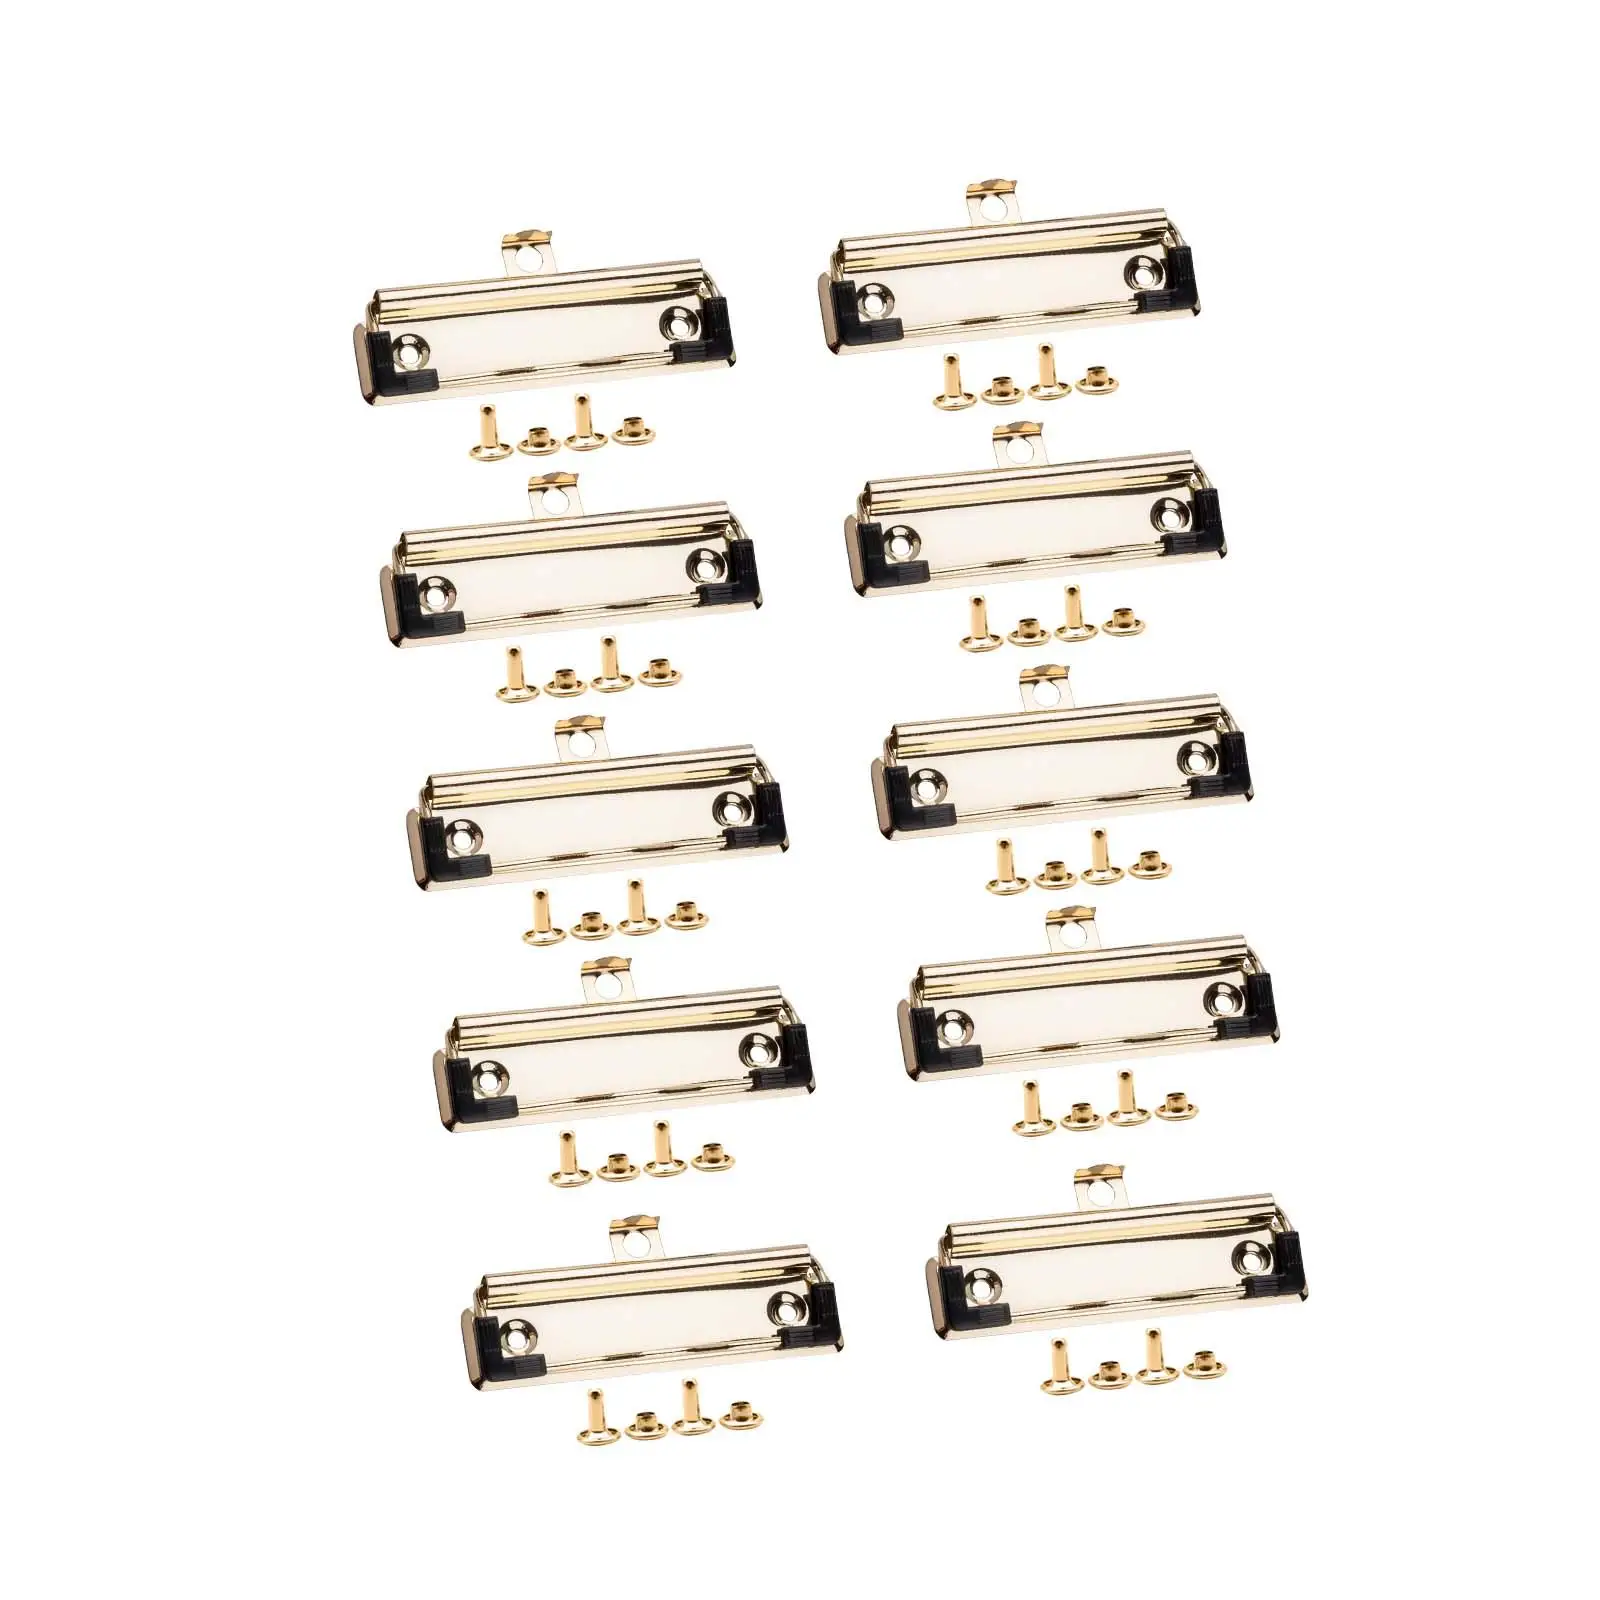 10x Document File Board Clips Stationery Plate Clips Mountable Heavy Duty Office Supplies Small Clipboard Clips Clipboard Clamps